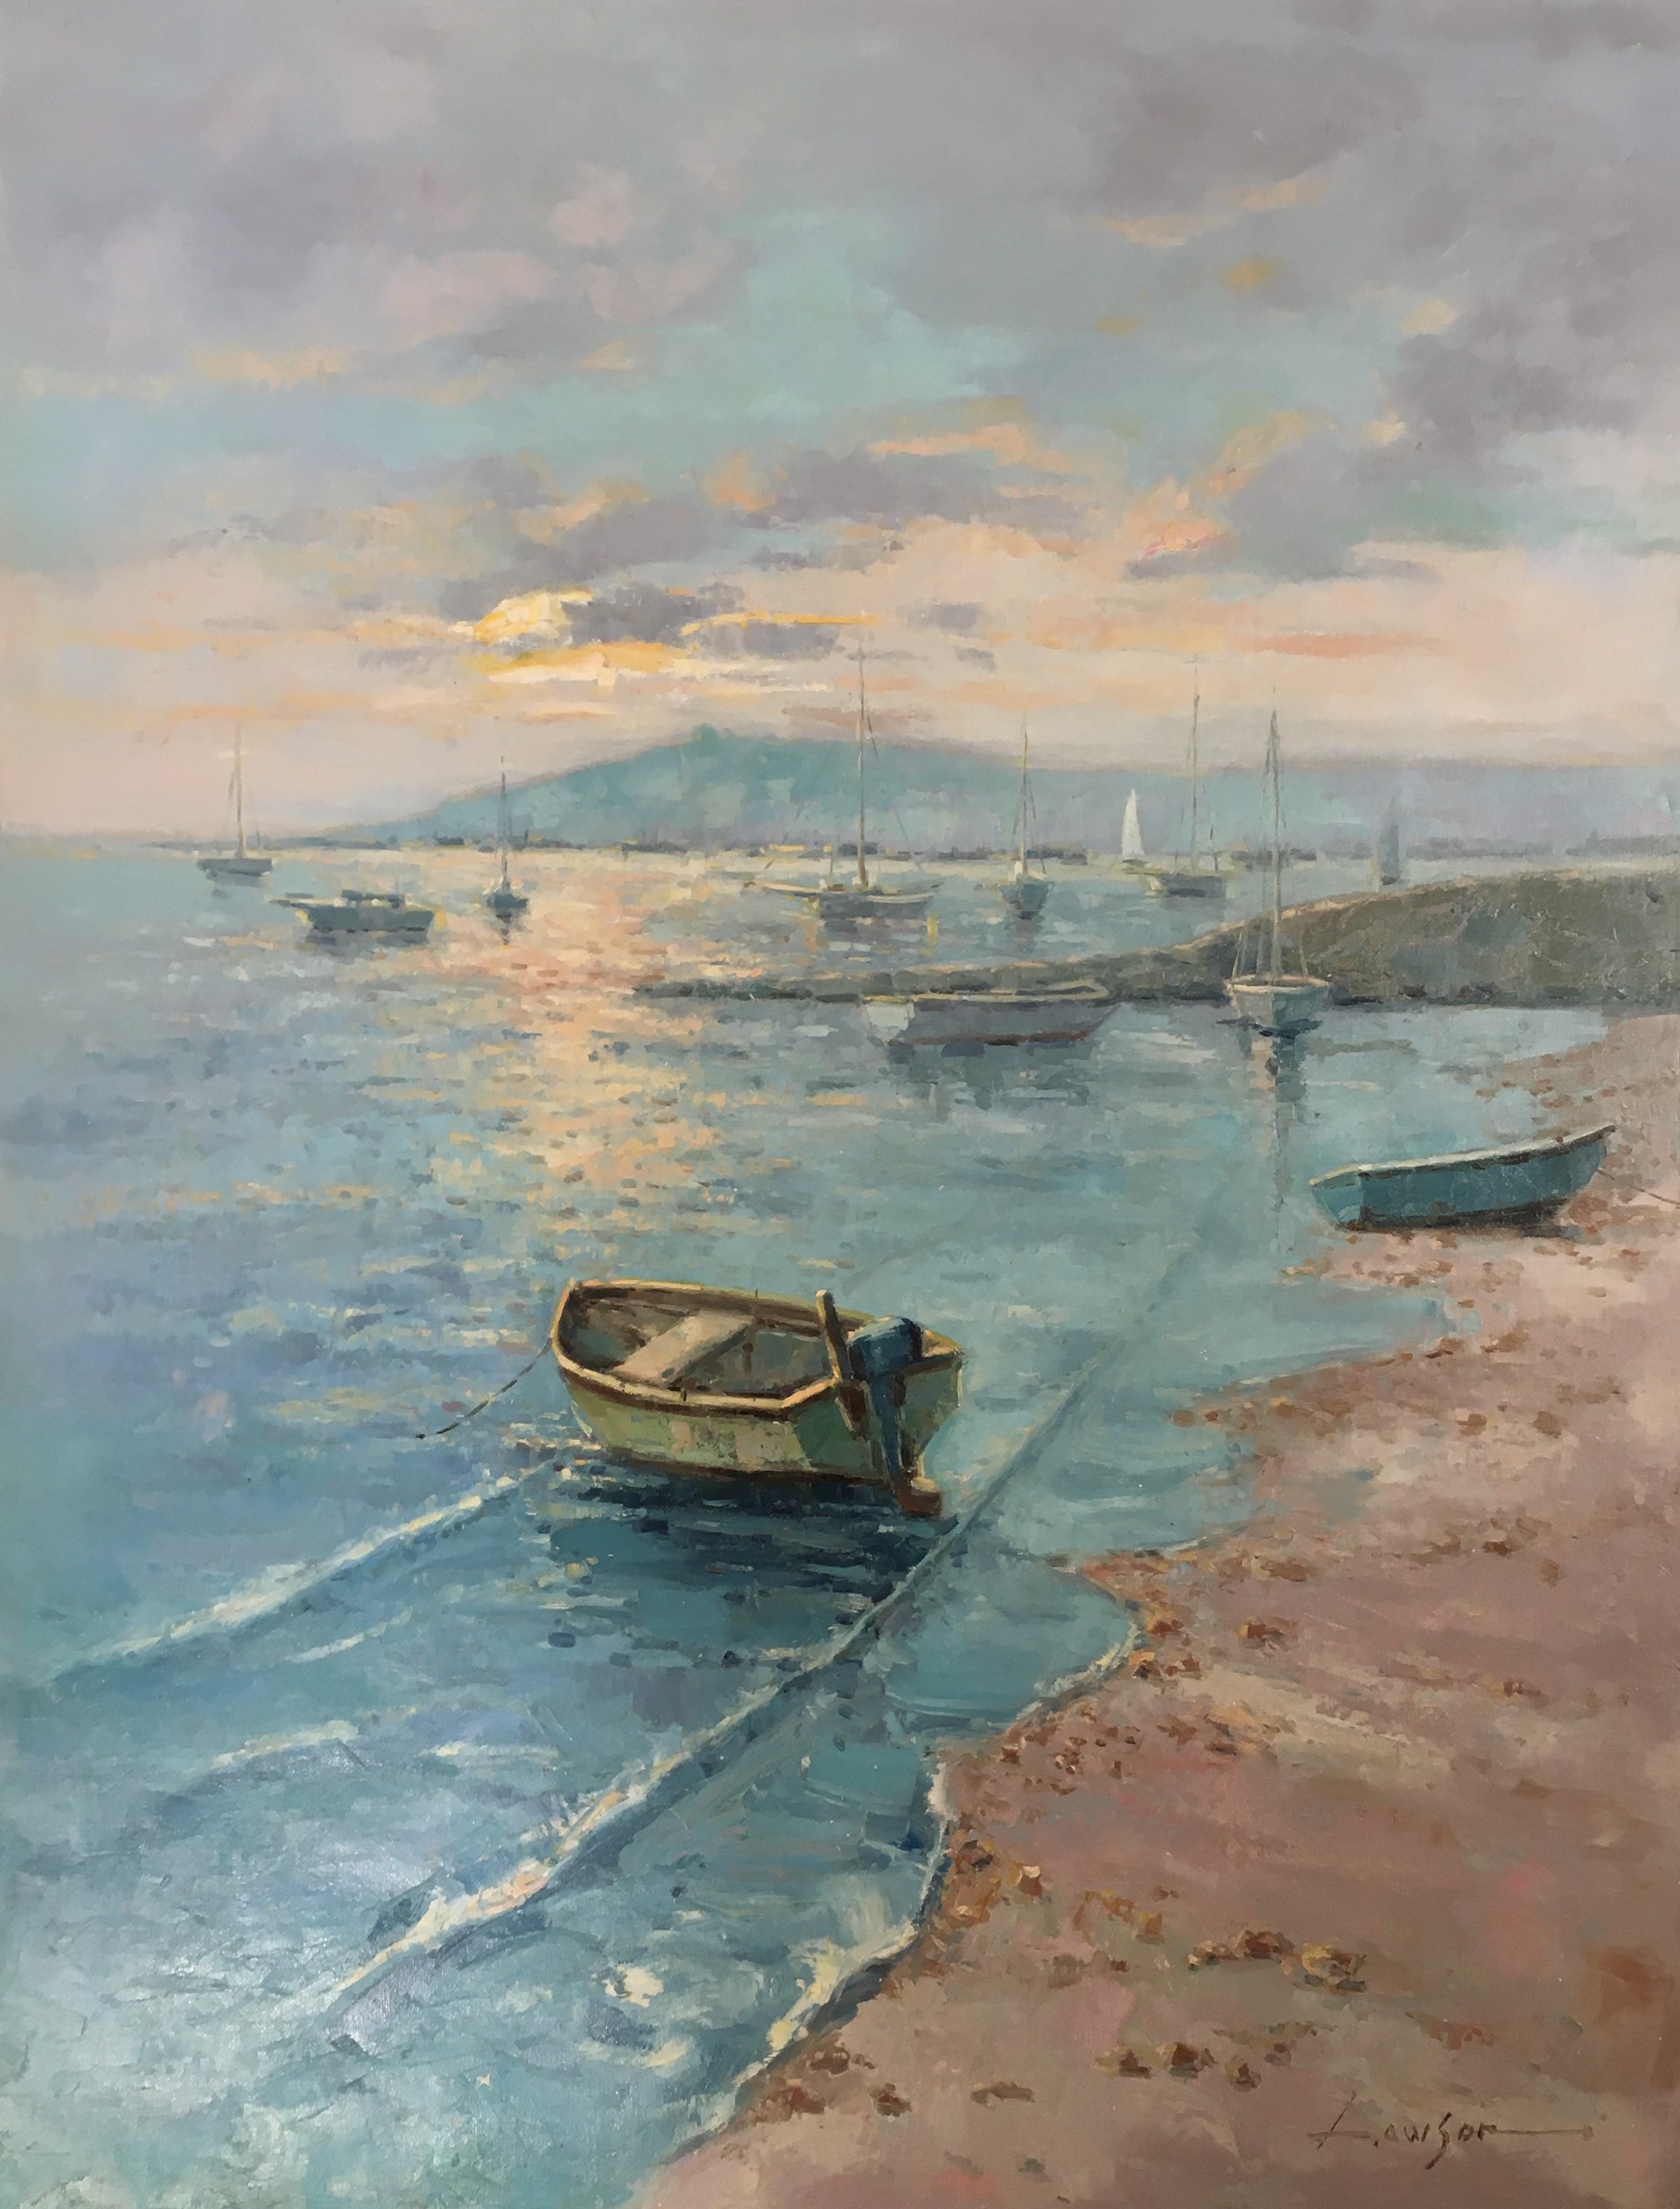 BOATS AT REST by LAWSON